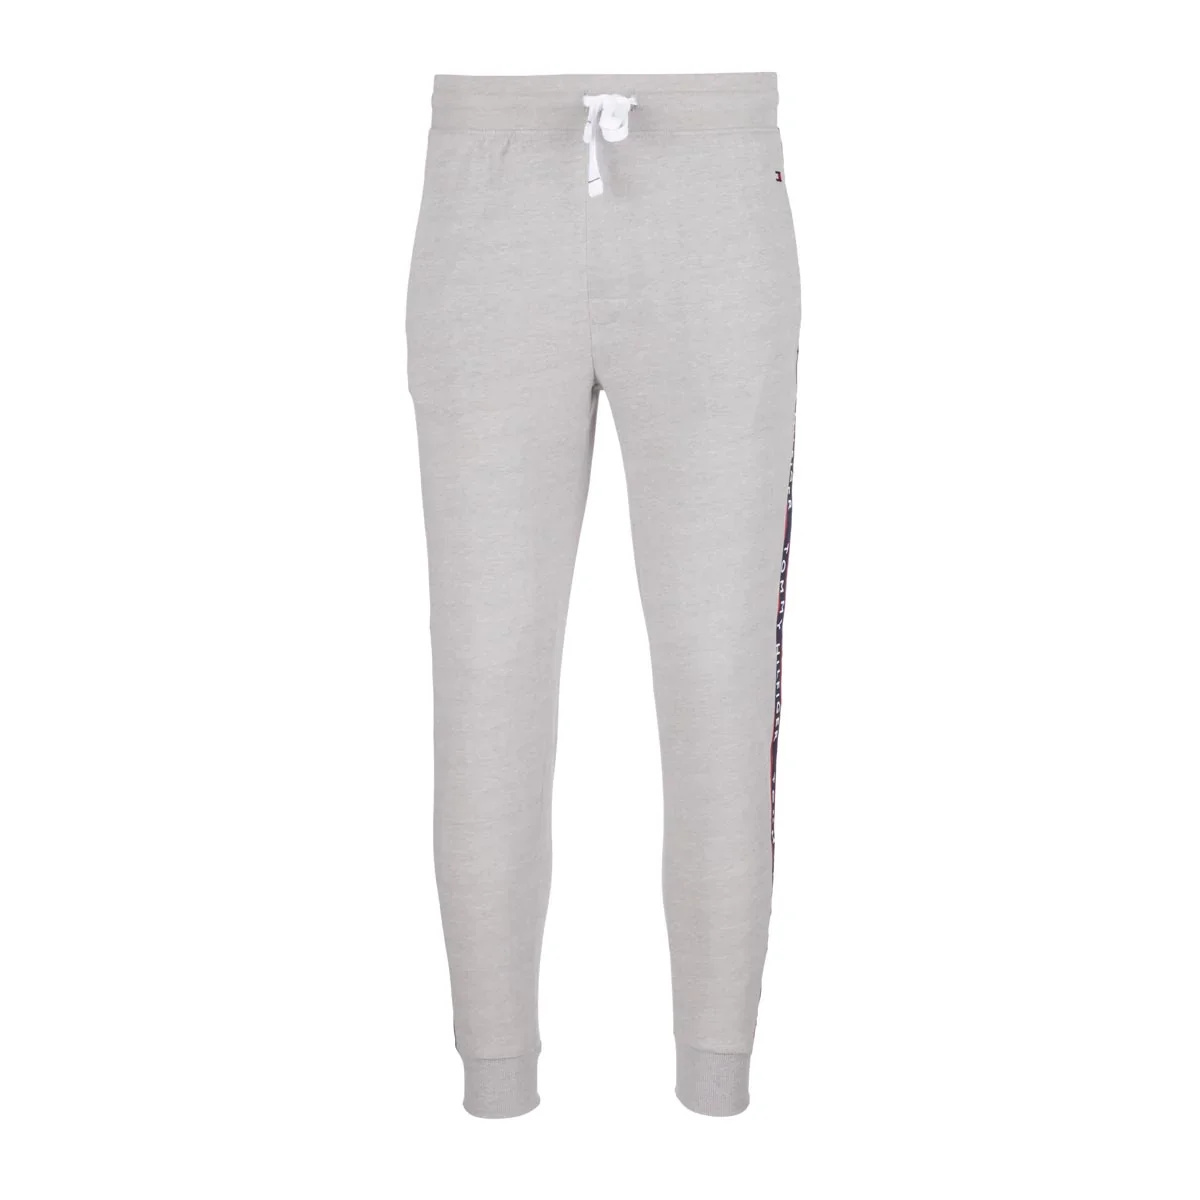 Image of Tommy Hilfiger Men's French Terry Jogger